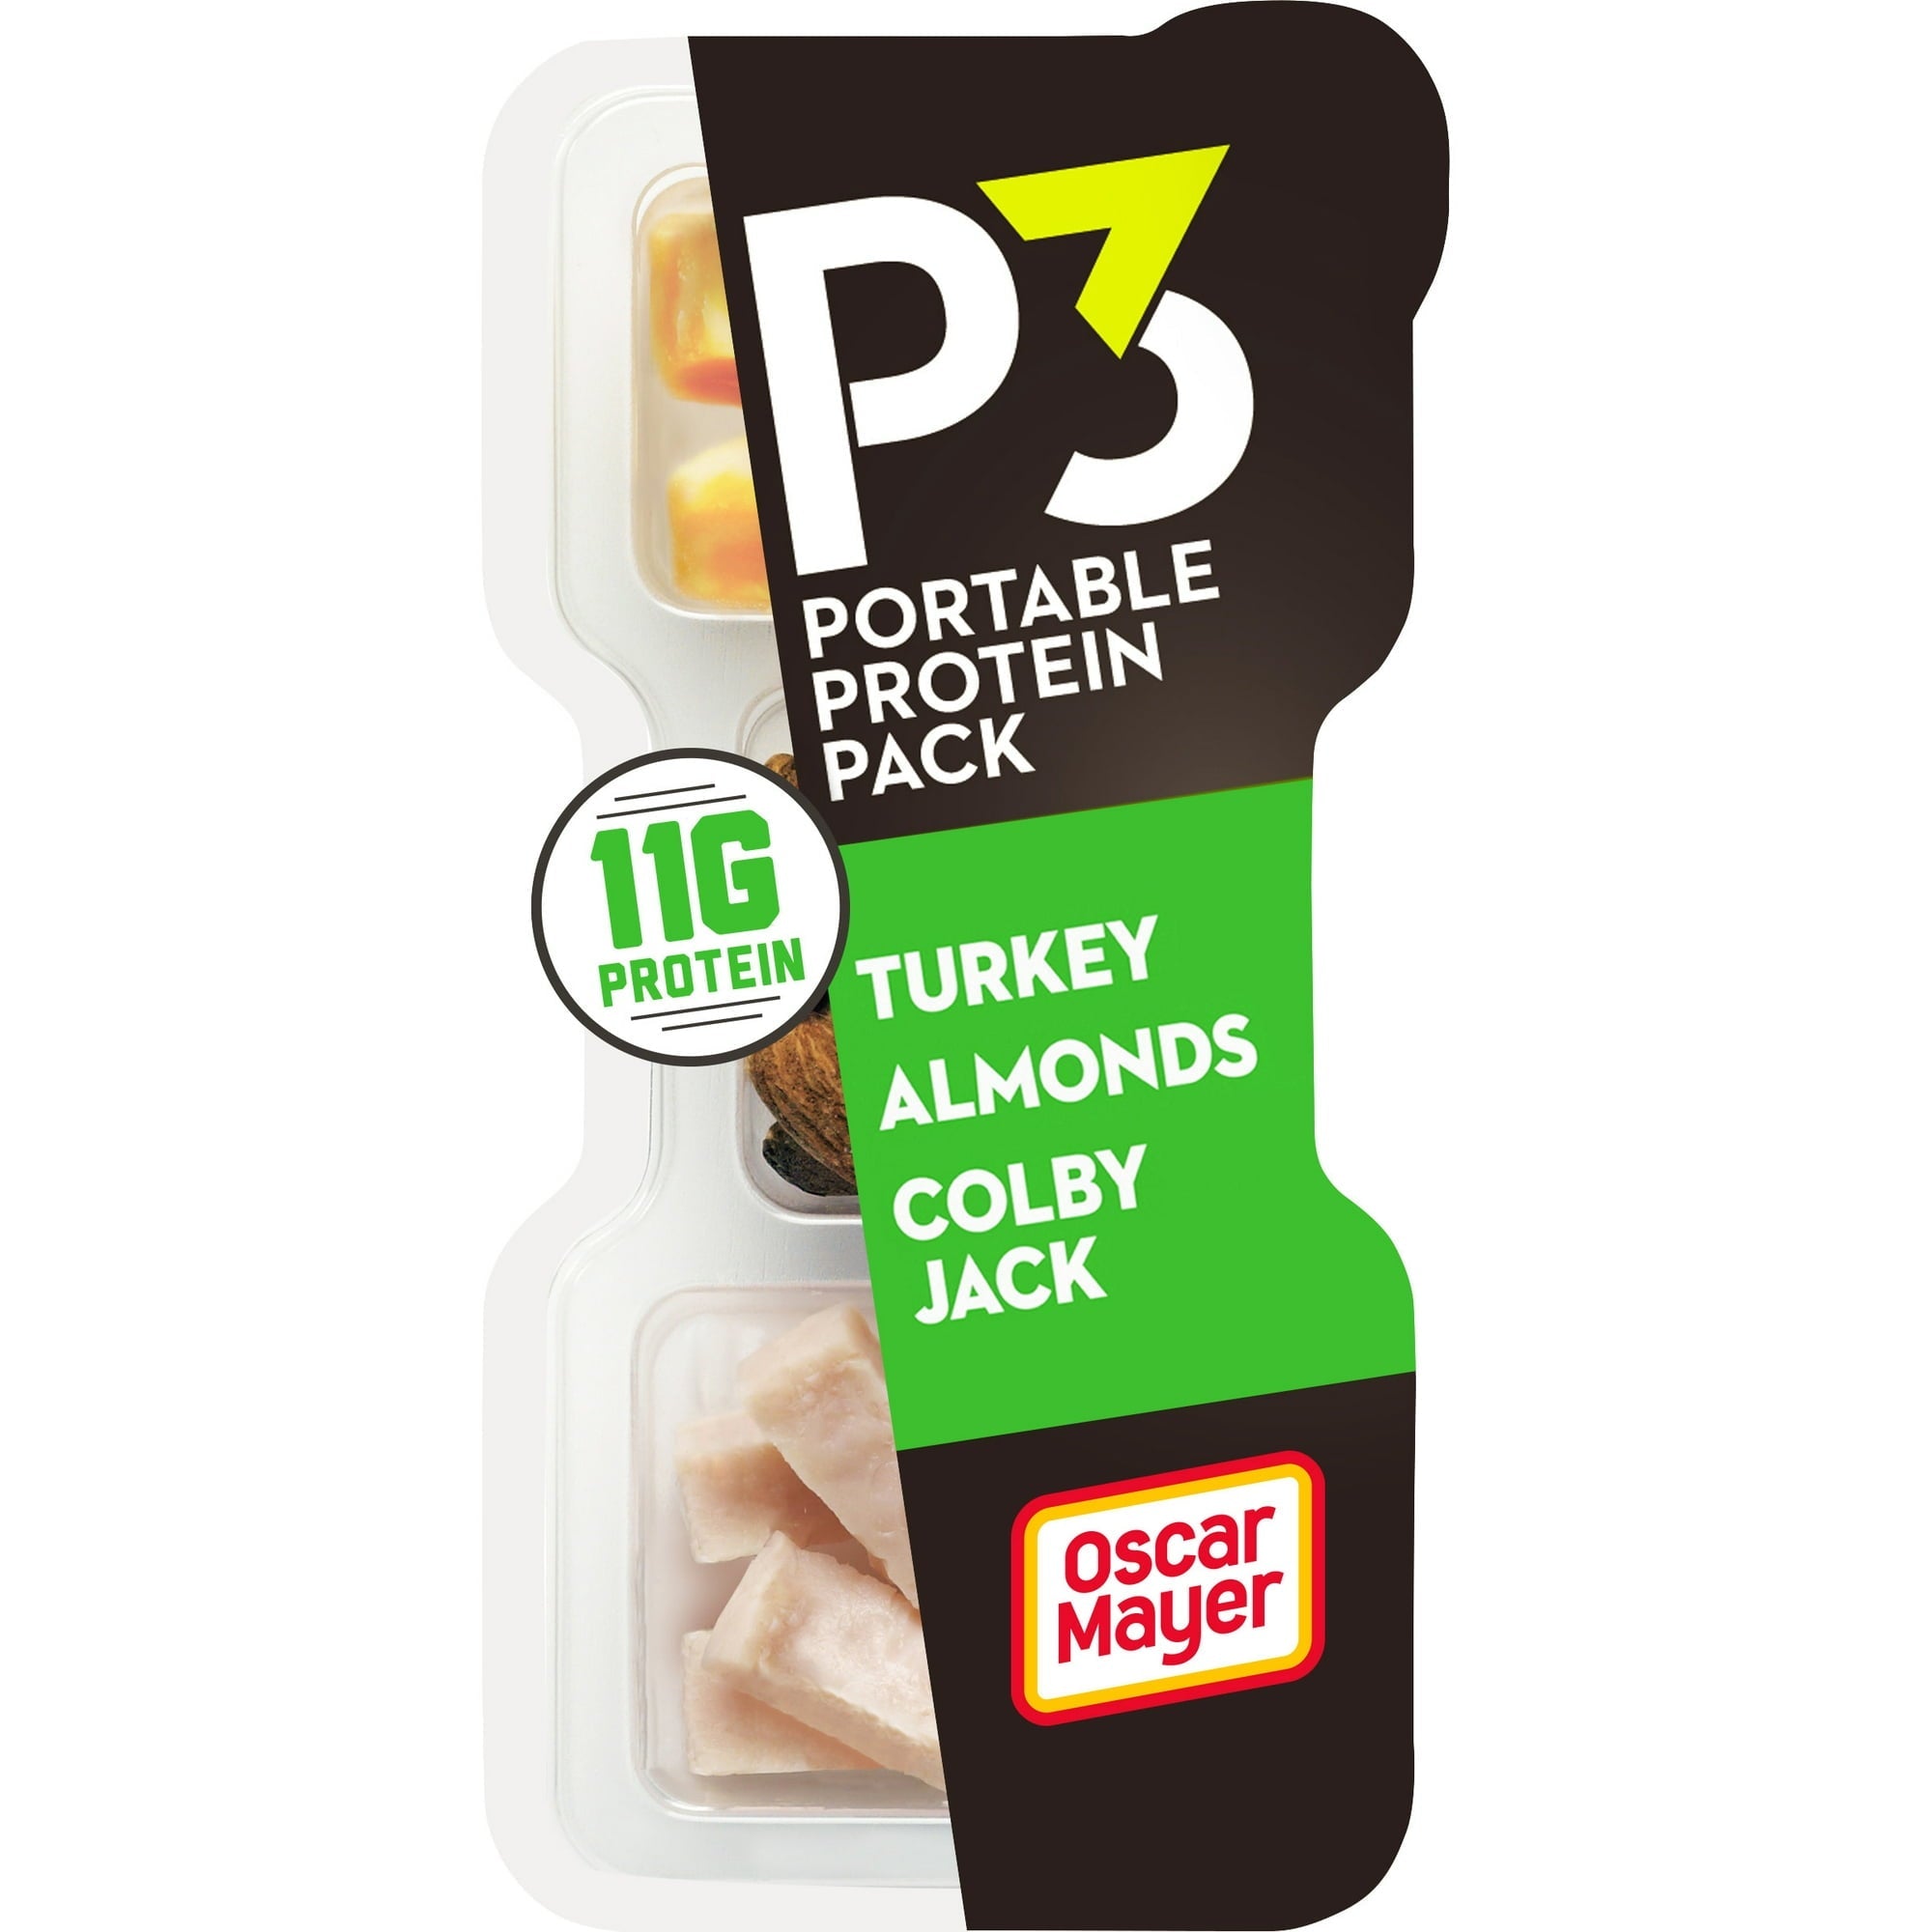 Oscar Mayer P3 Portable Protein Pack Turkey, Almonds and Colby Jack 2 Oz Tray